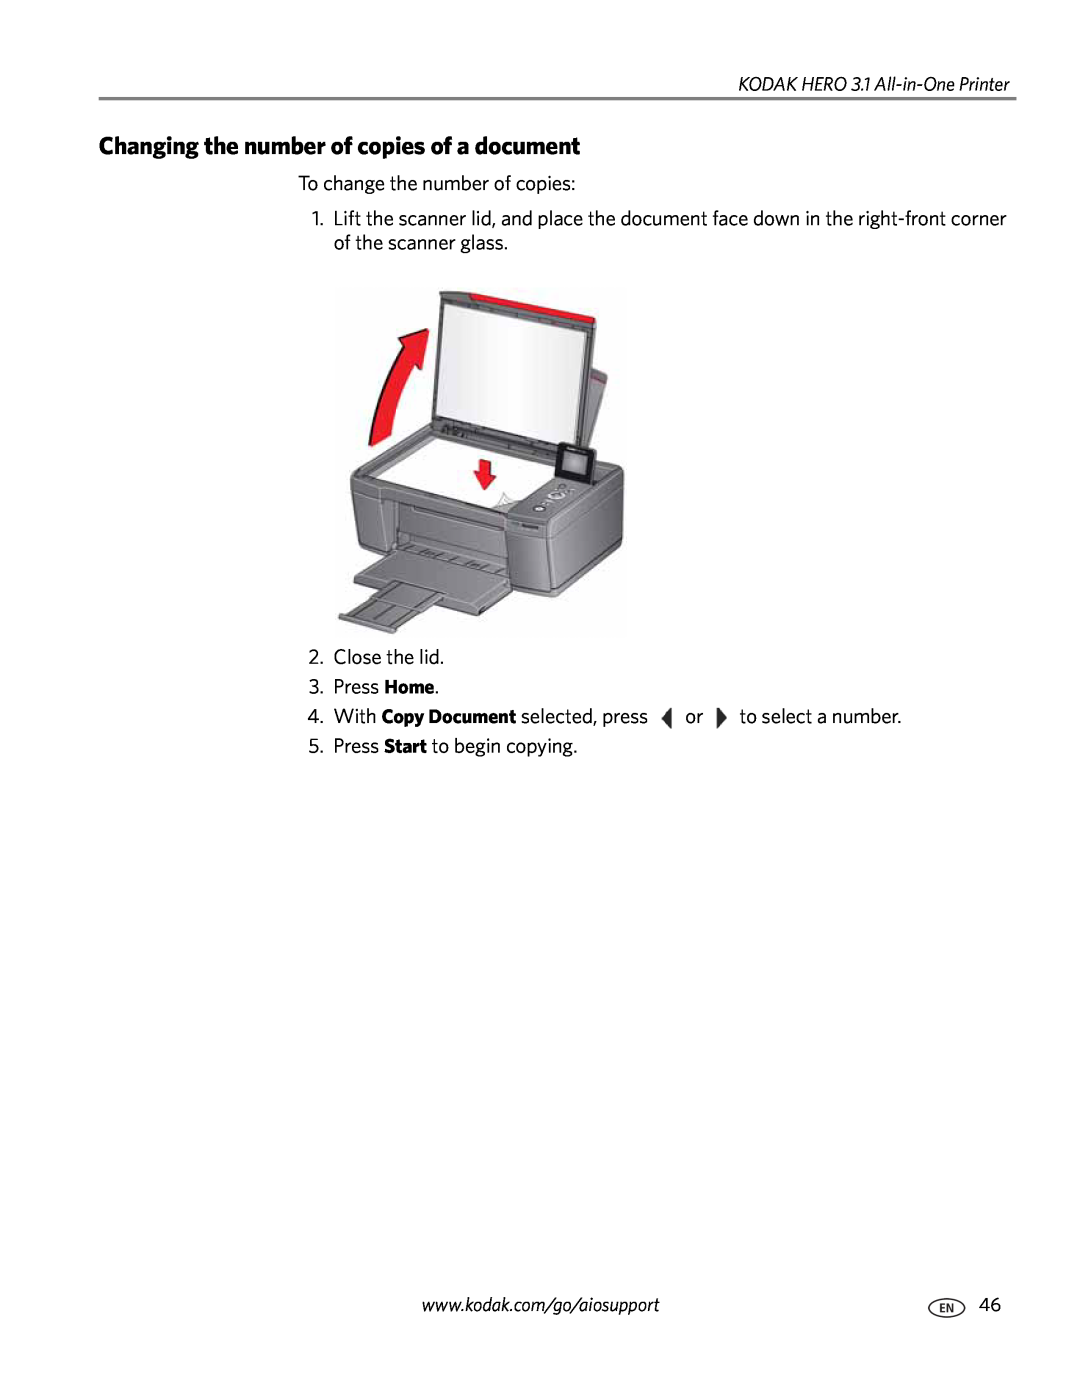 Kodak 3.1 manual Changing the number of copies of a document, To change the number of copies, Close the lid 3. Press Home 